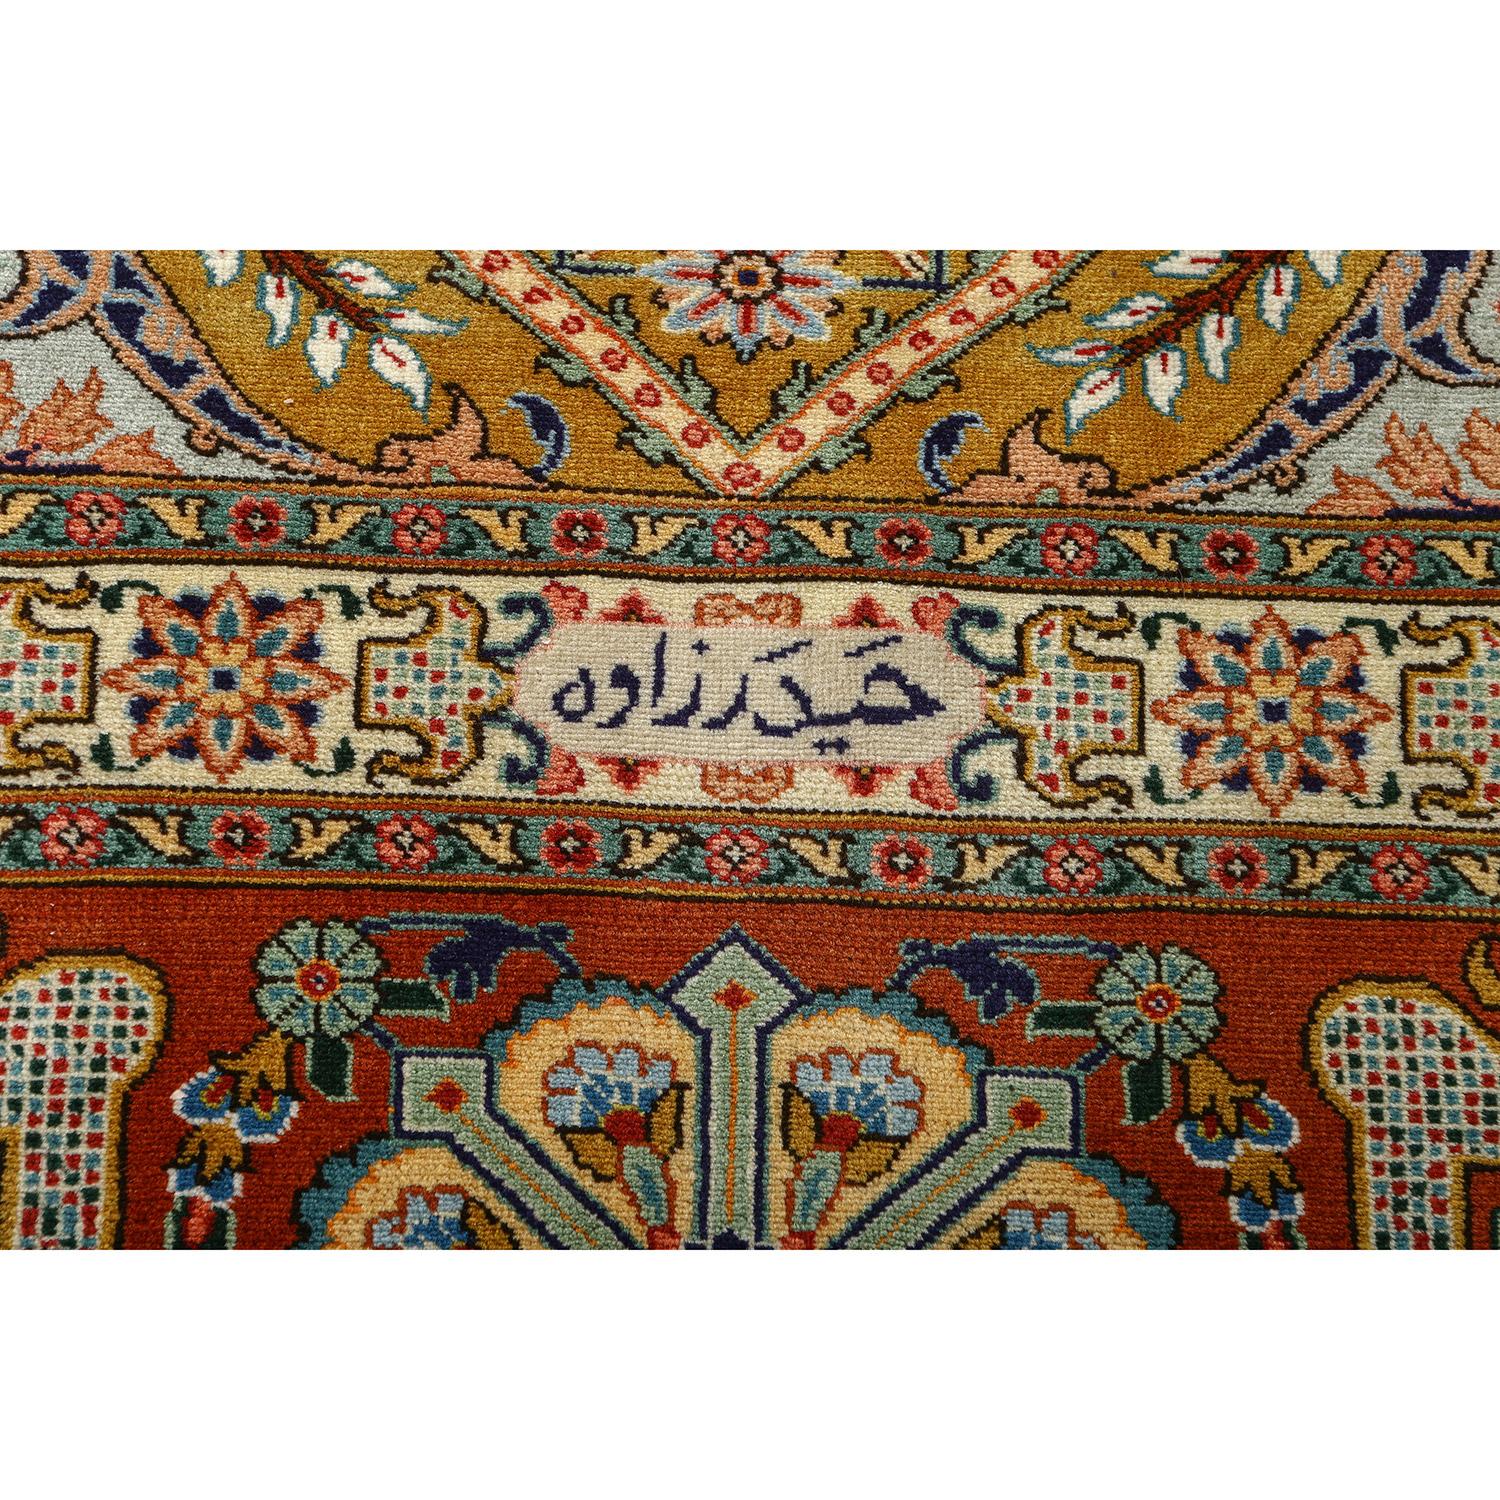 This Tabriz rug, woven by the skilled artisan Heydarzadeh, is a testament to the rich heritage of Persian craftsmanship. Heydarzadeh's name adds a touch of prestige to this already exquisite piece, signifying the weaver's dedication and